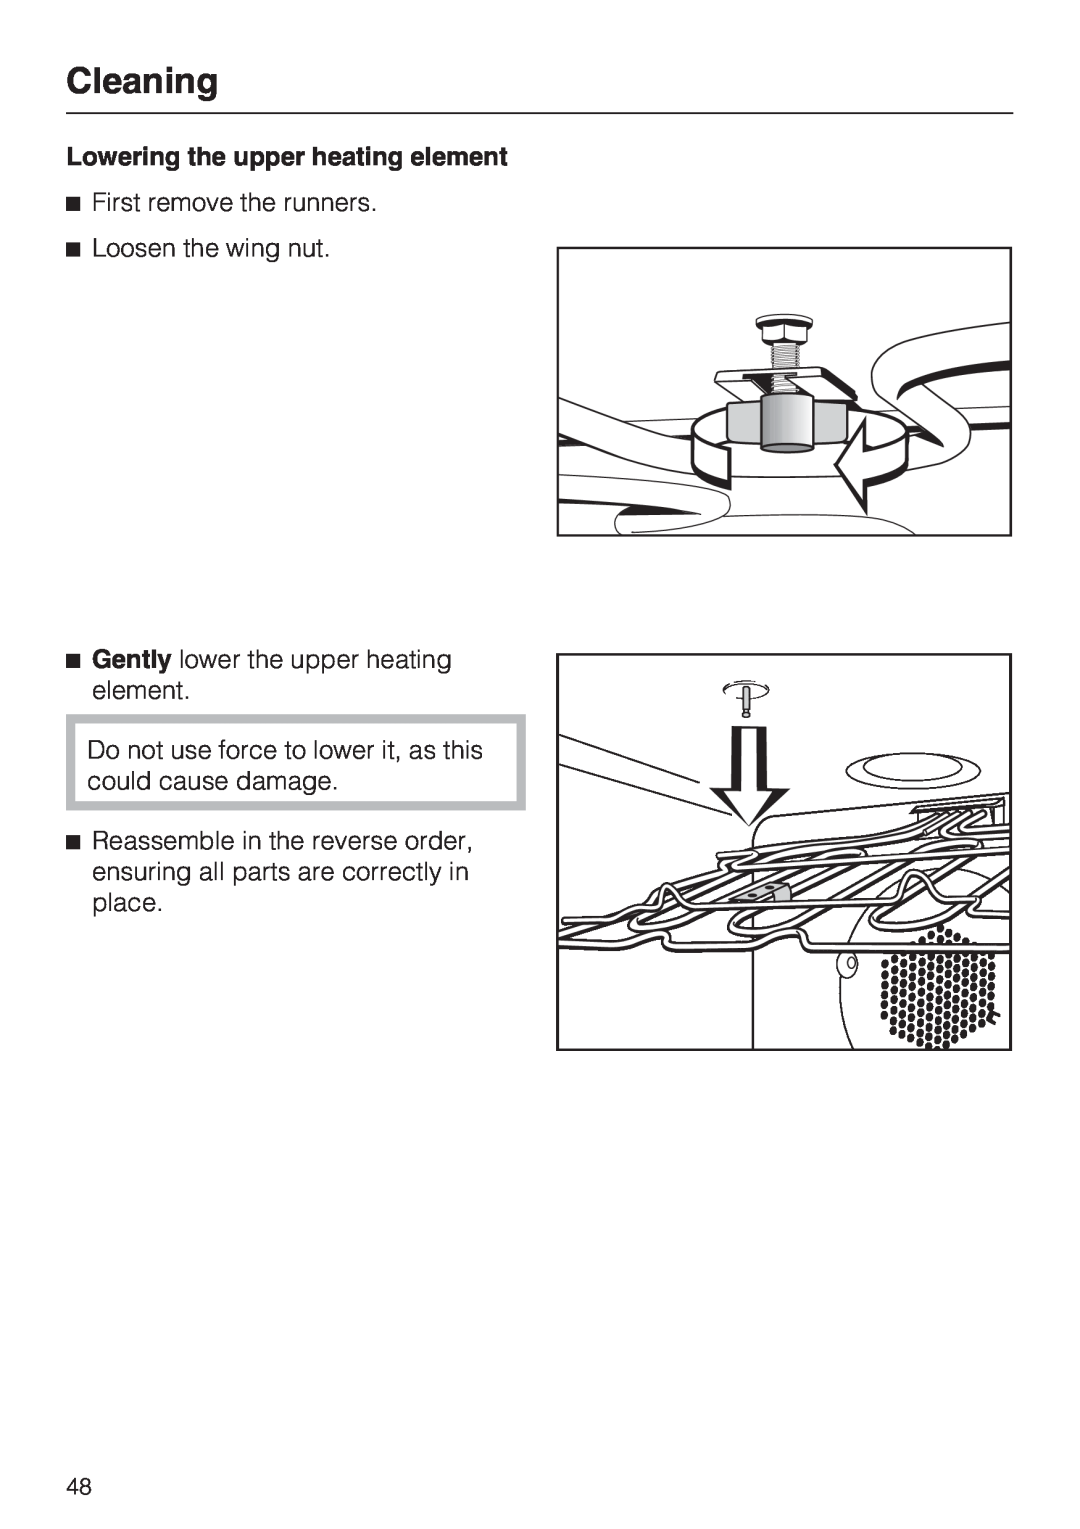 Miele H 4846 BP, H 4844 BP installation instructions Cleaning, Lowering the upper heating element 